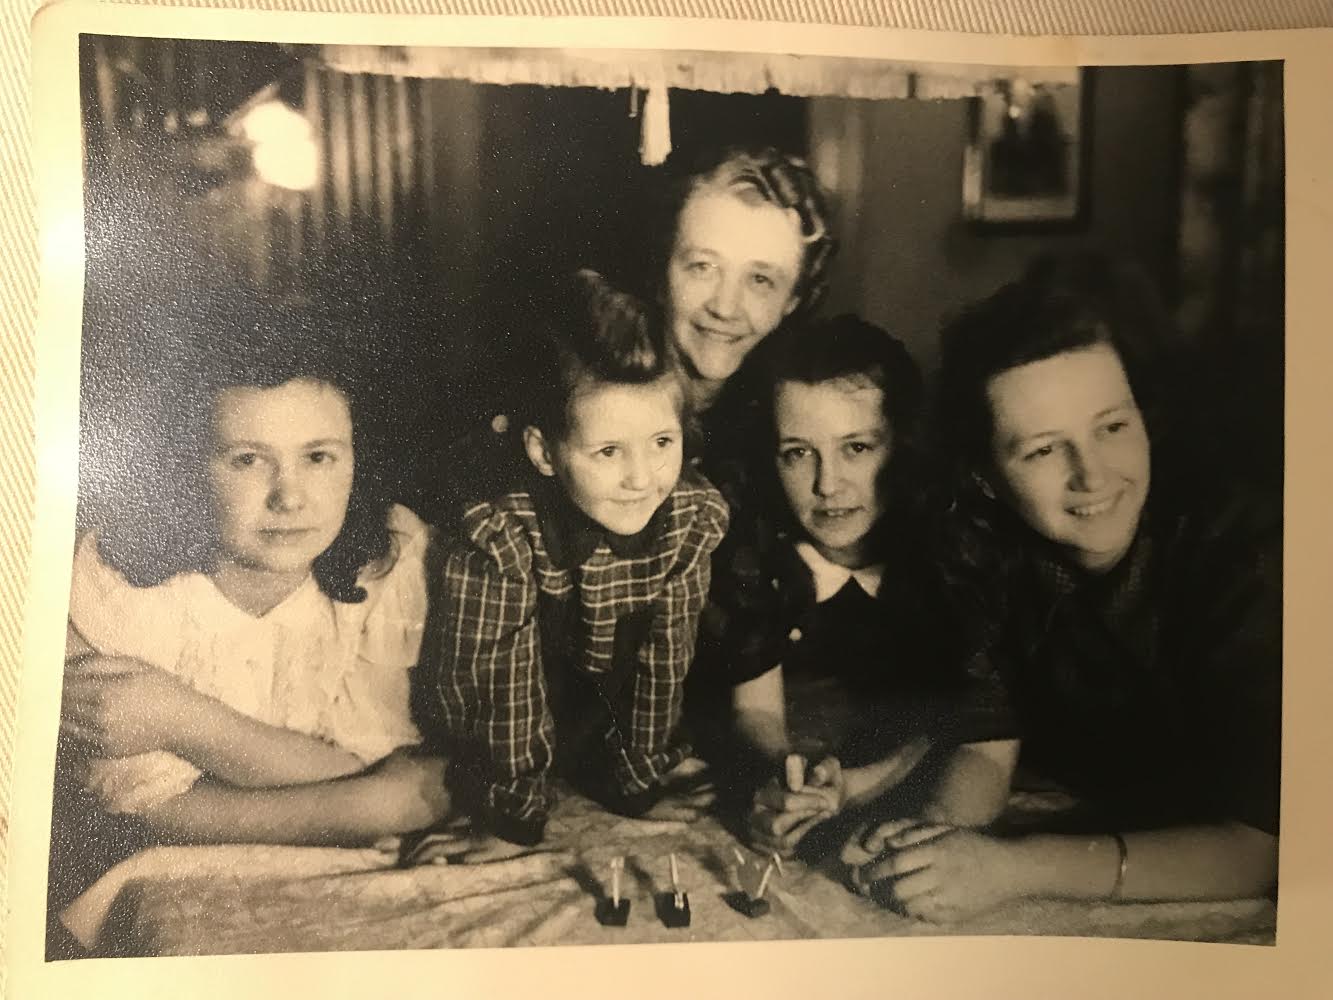 William McGowan's grandmother and three children, including his mother Ilse